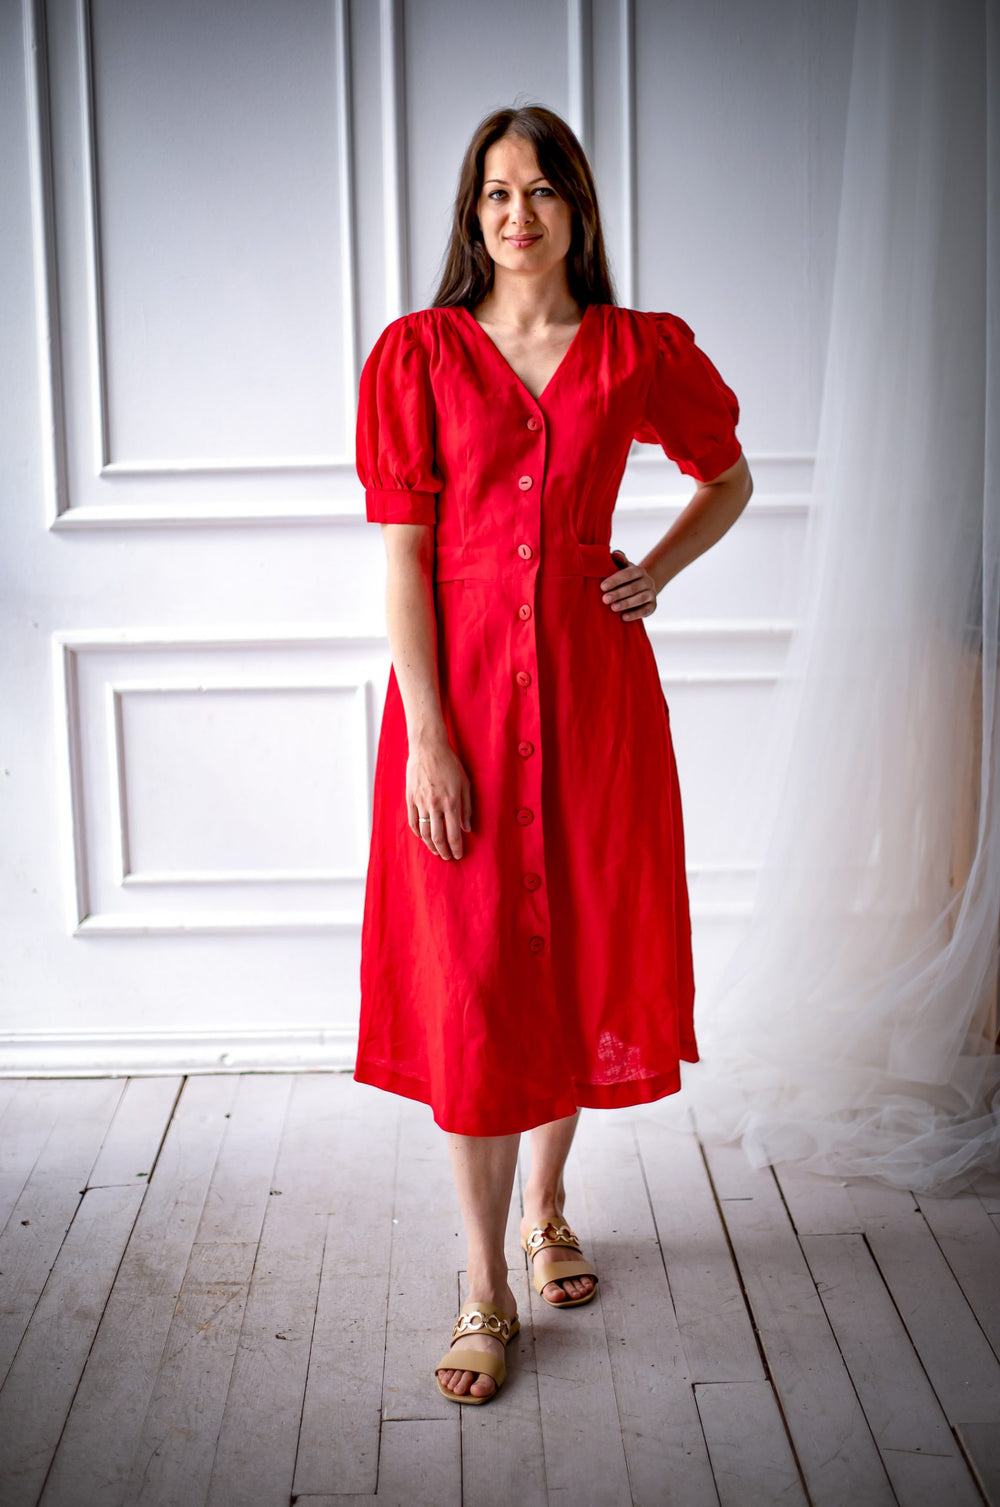 Woman wearing the Stella Dress sewing pattern from Kates Sewing Patterns on The Fold Line. A dress pattern made in cotton, linen or silk fabrics, featuring shoulder gathers, short voluminous sleeves with gathers at the top and bottom, below knee length fl